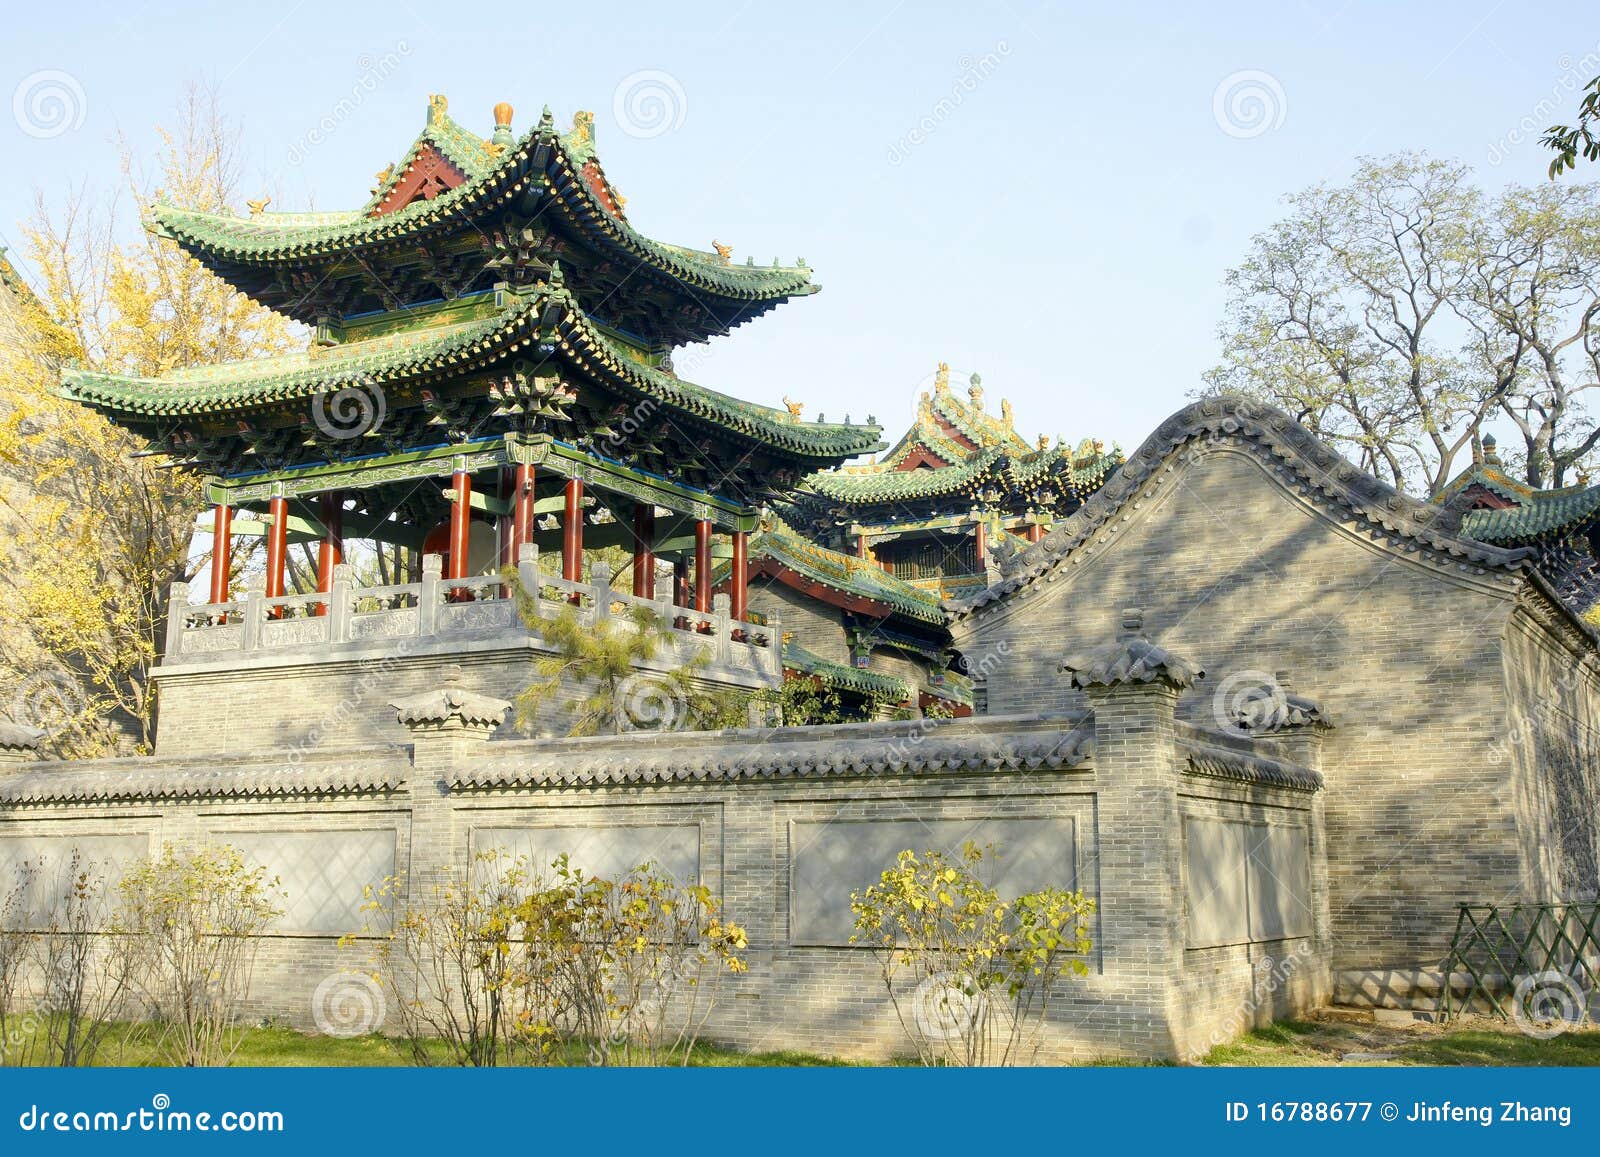 chinese buildings royalty free stock photography - image